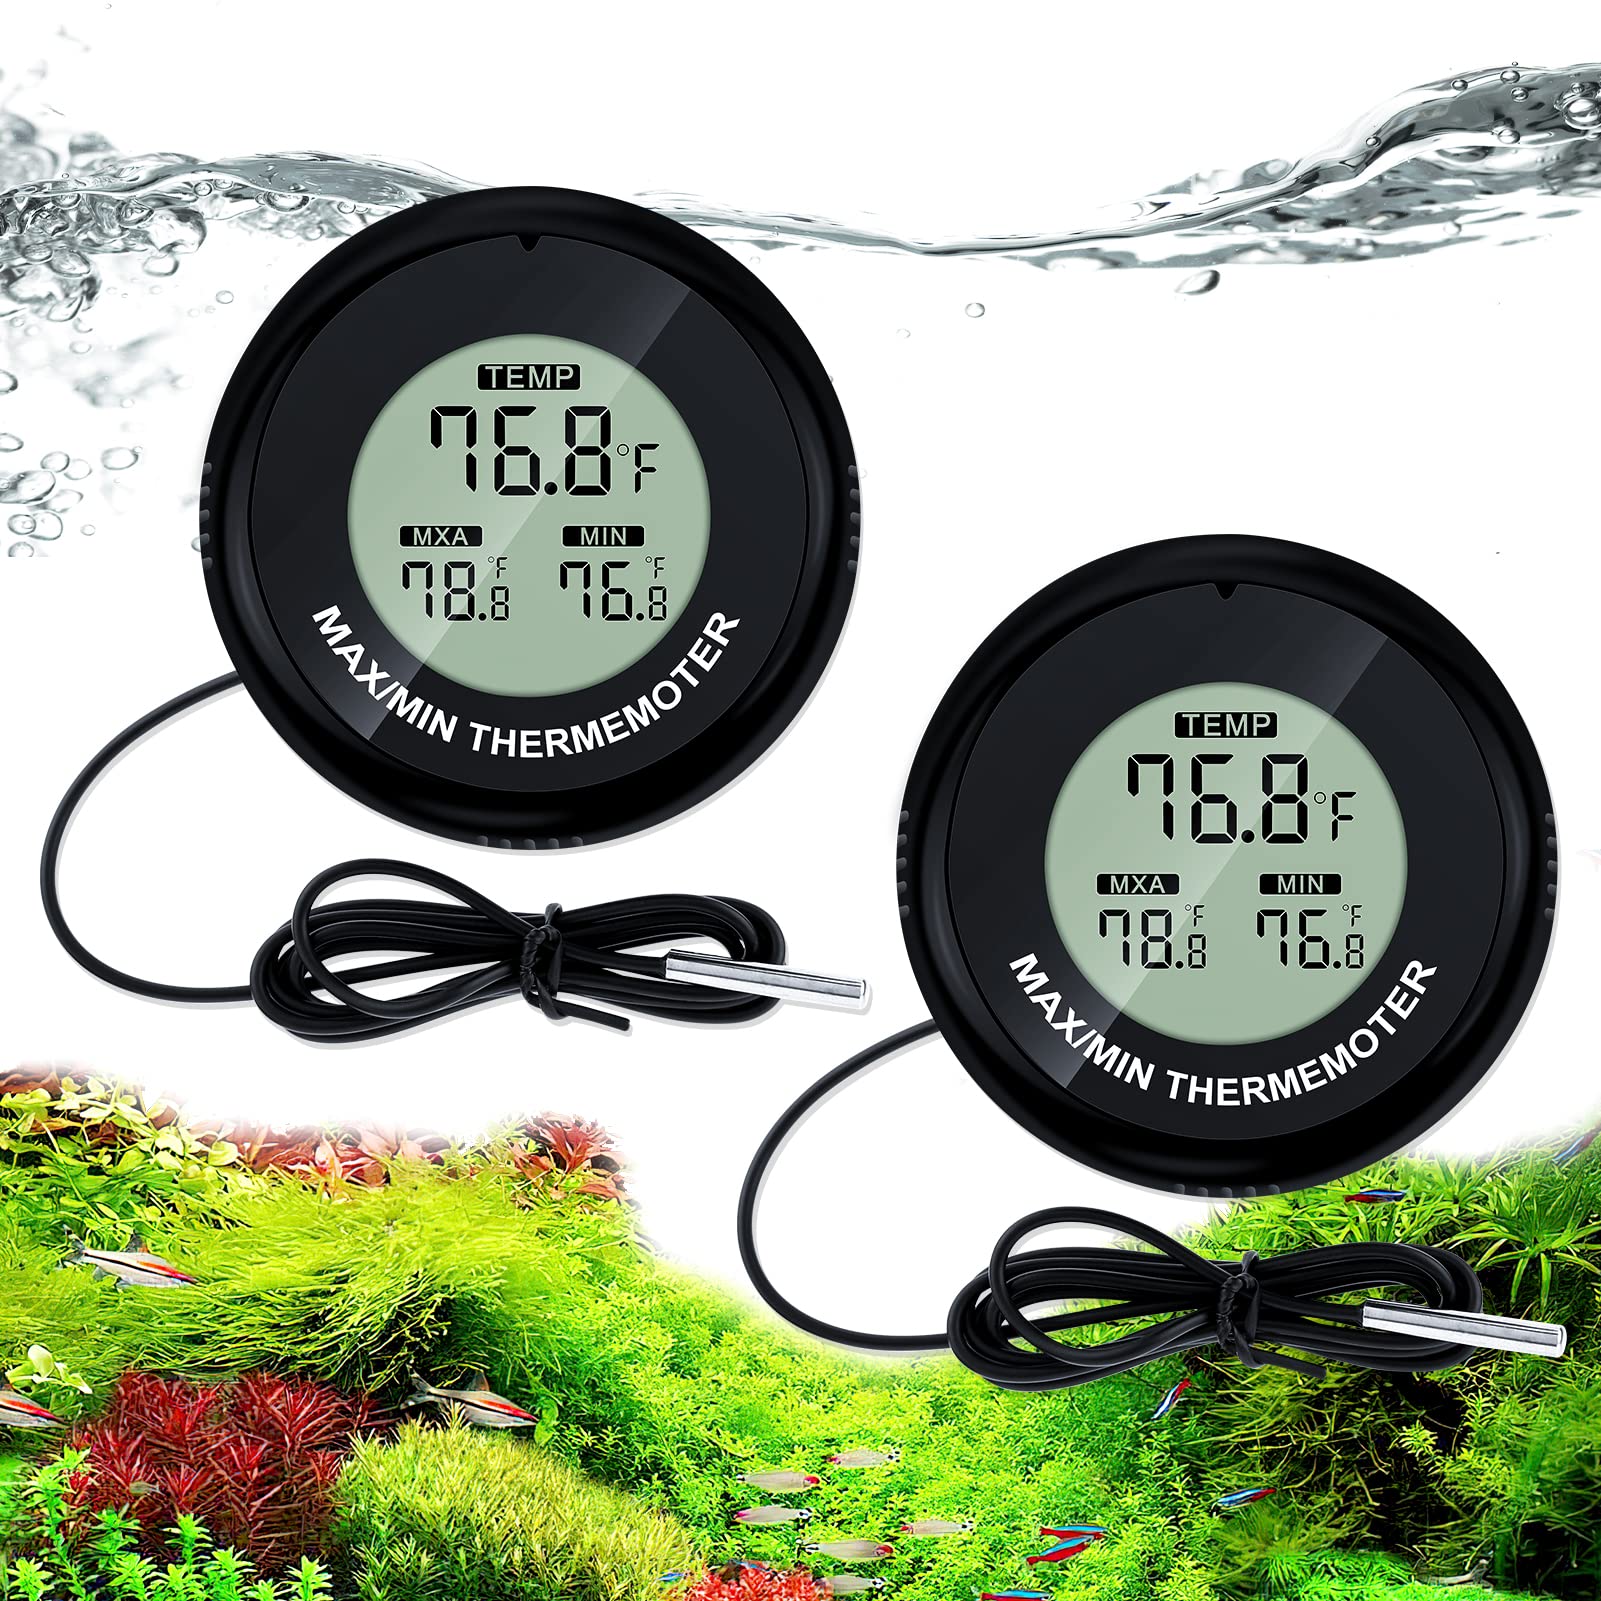 2-Pack Digital Aquarium Thermometer, High Accuracy Fish Tank Thermometer  for Fish Axolotl Turtle Tank Temperature Measurement, LCD Thermometer  Aquarium with Record of Max and Min Temperature